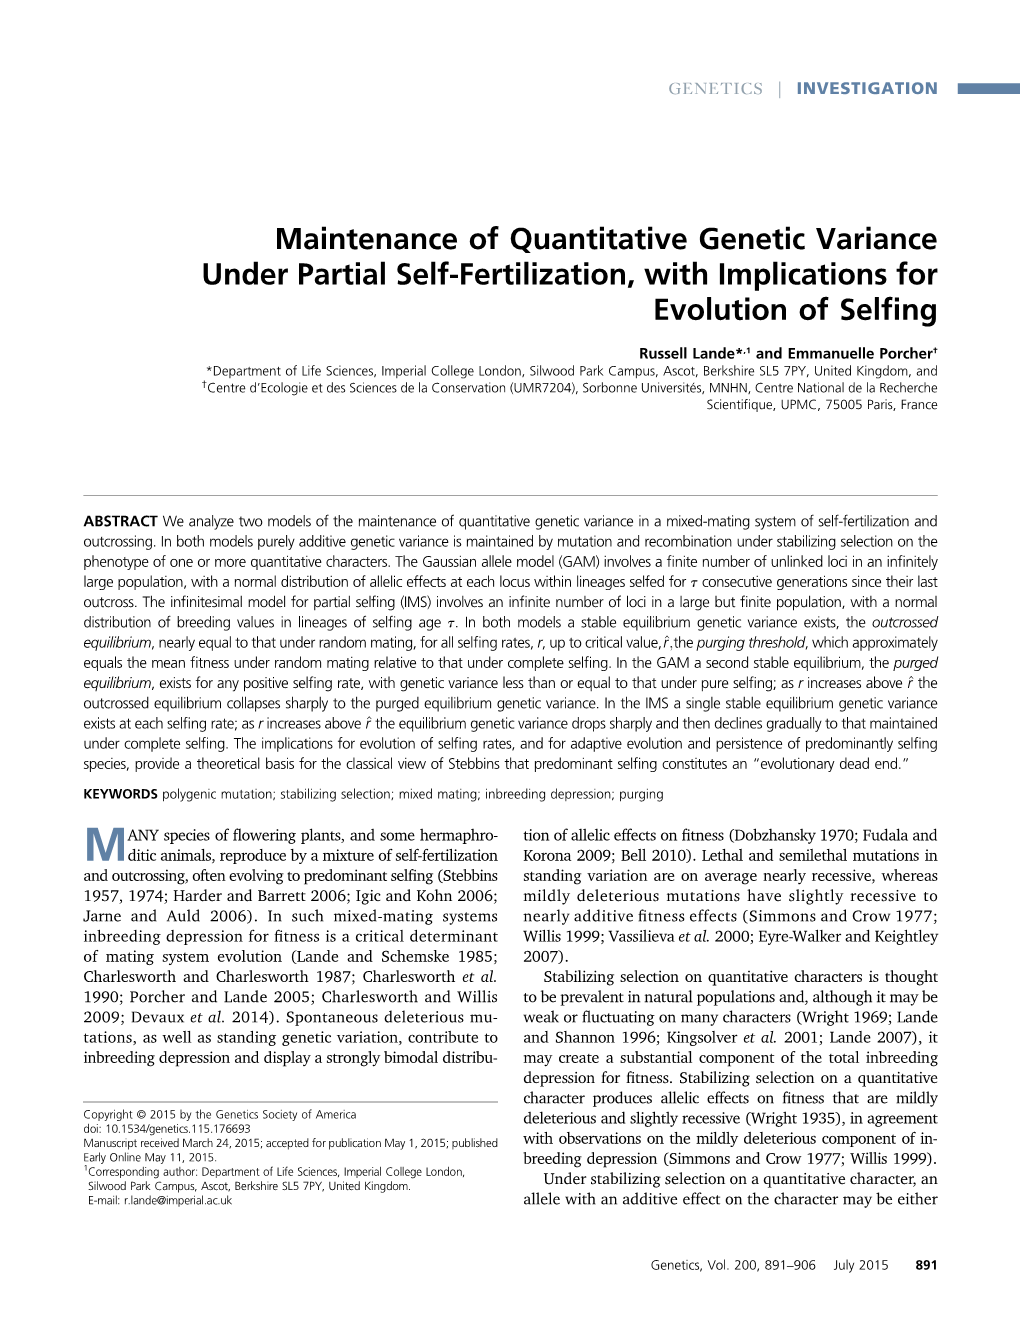 Maintenance of Quantitative Genetic Variance Under Partial Self-Fertilization, with Implications for Evolution of Selﬁng